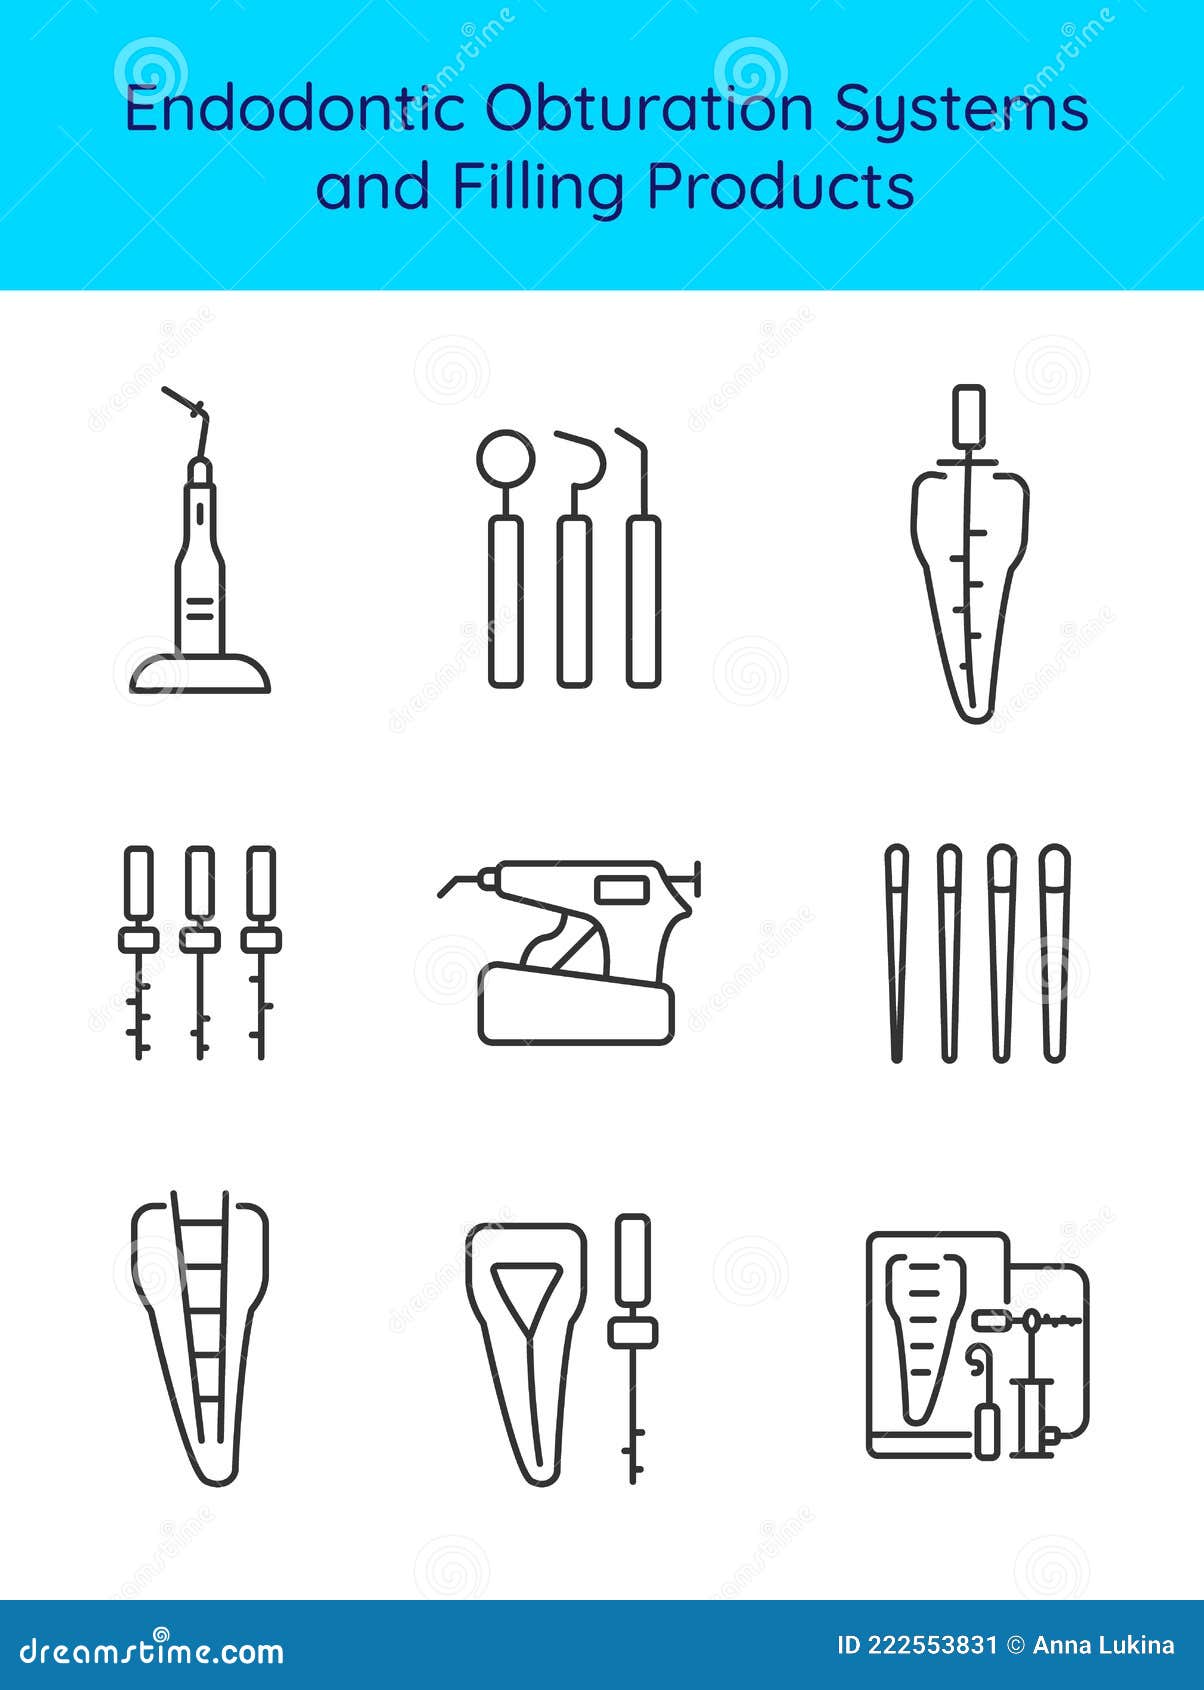 endodontic obturation systems and filling products icon set . root canal treatment. endodontist dentist equipment and